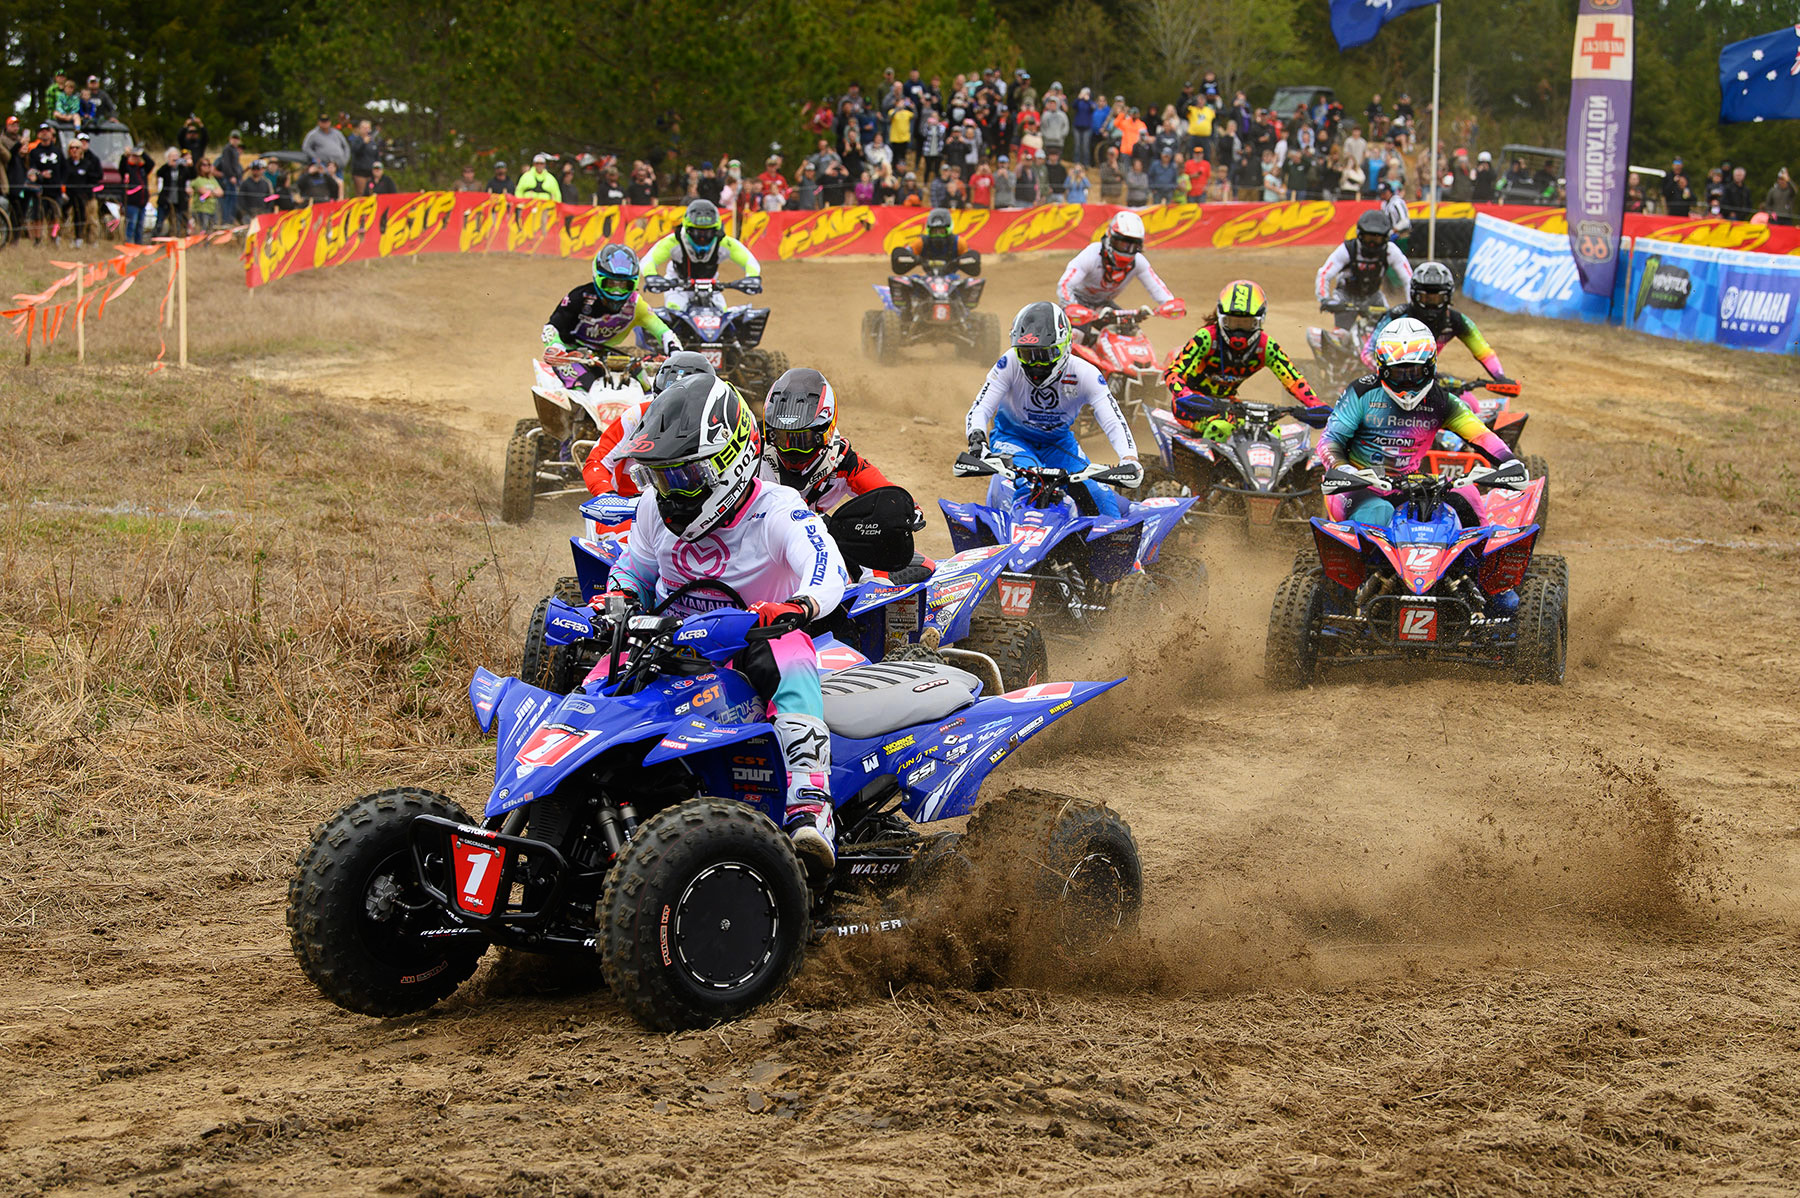 GNCC racer Brycen Neal with the holeshot.